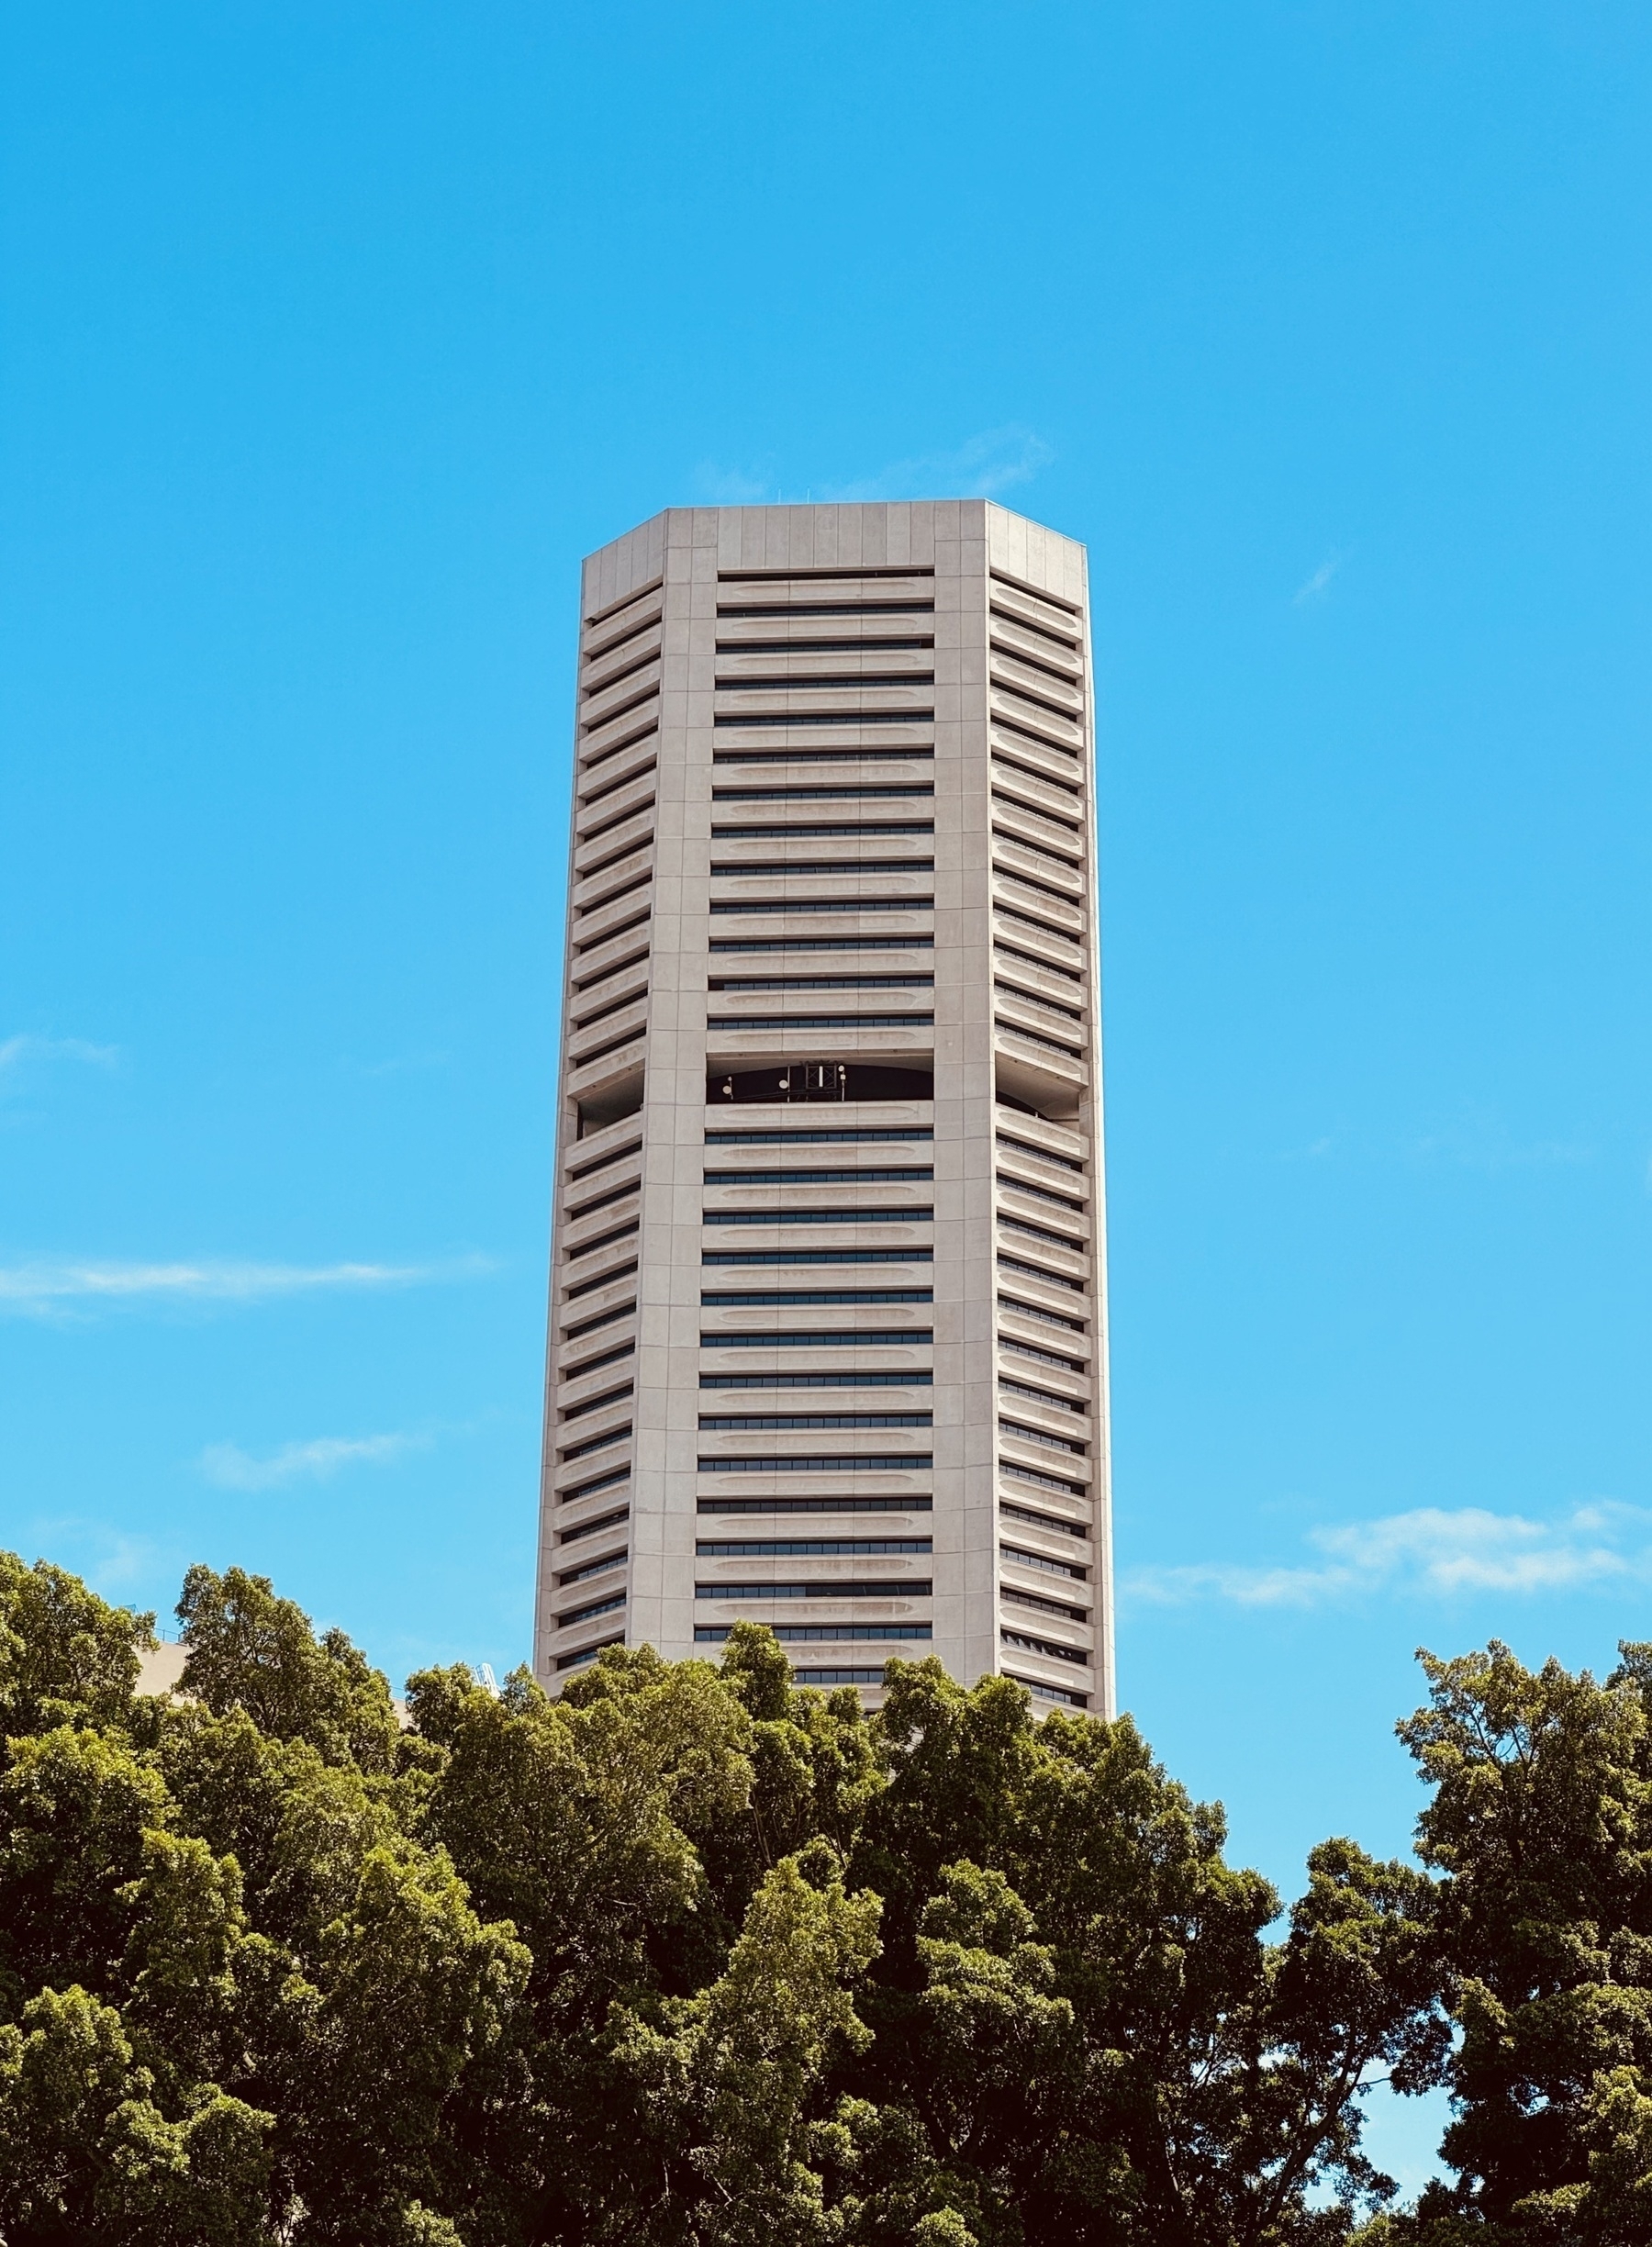 A tower block against a blue sky, with trees at the base.